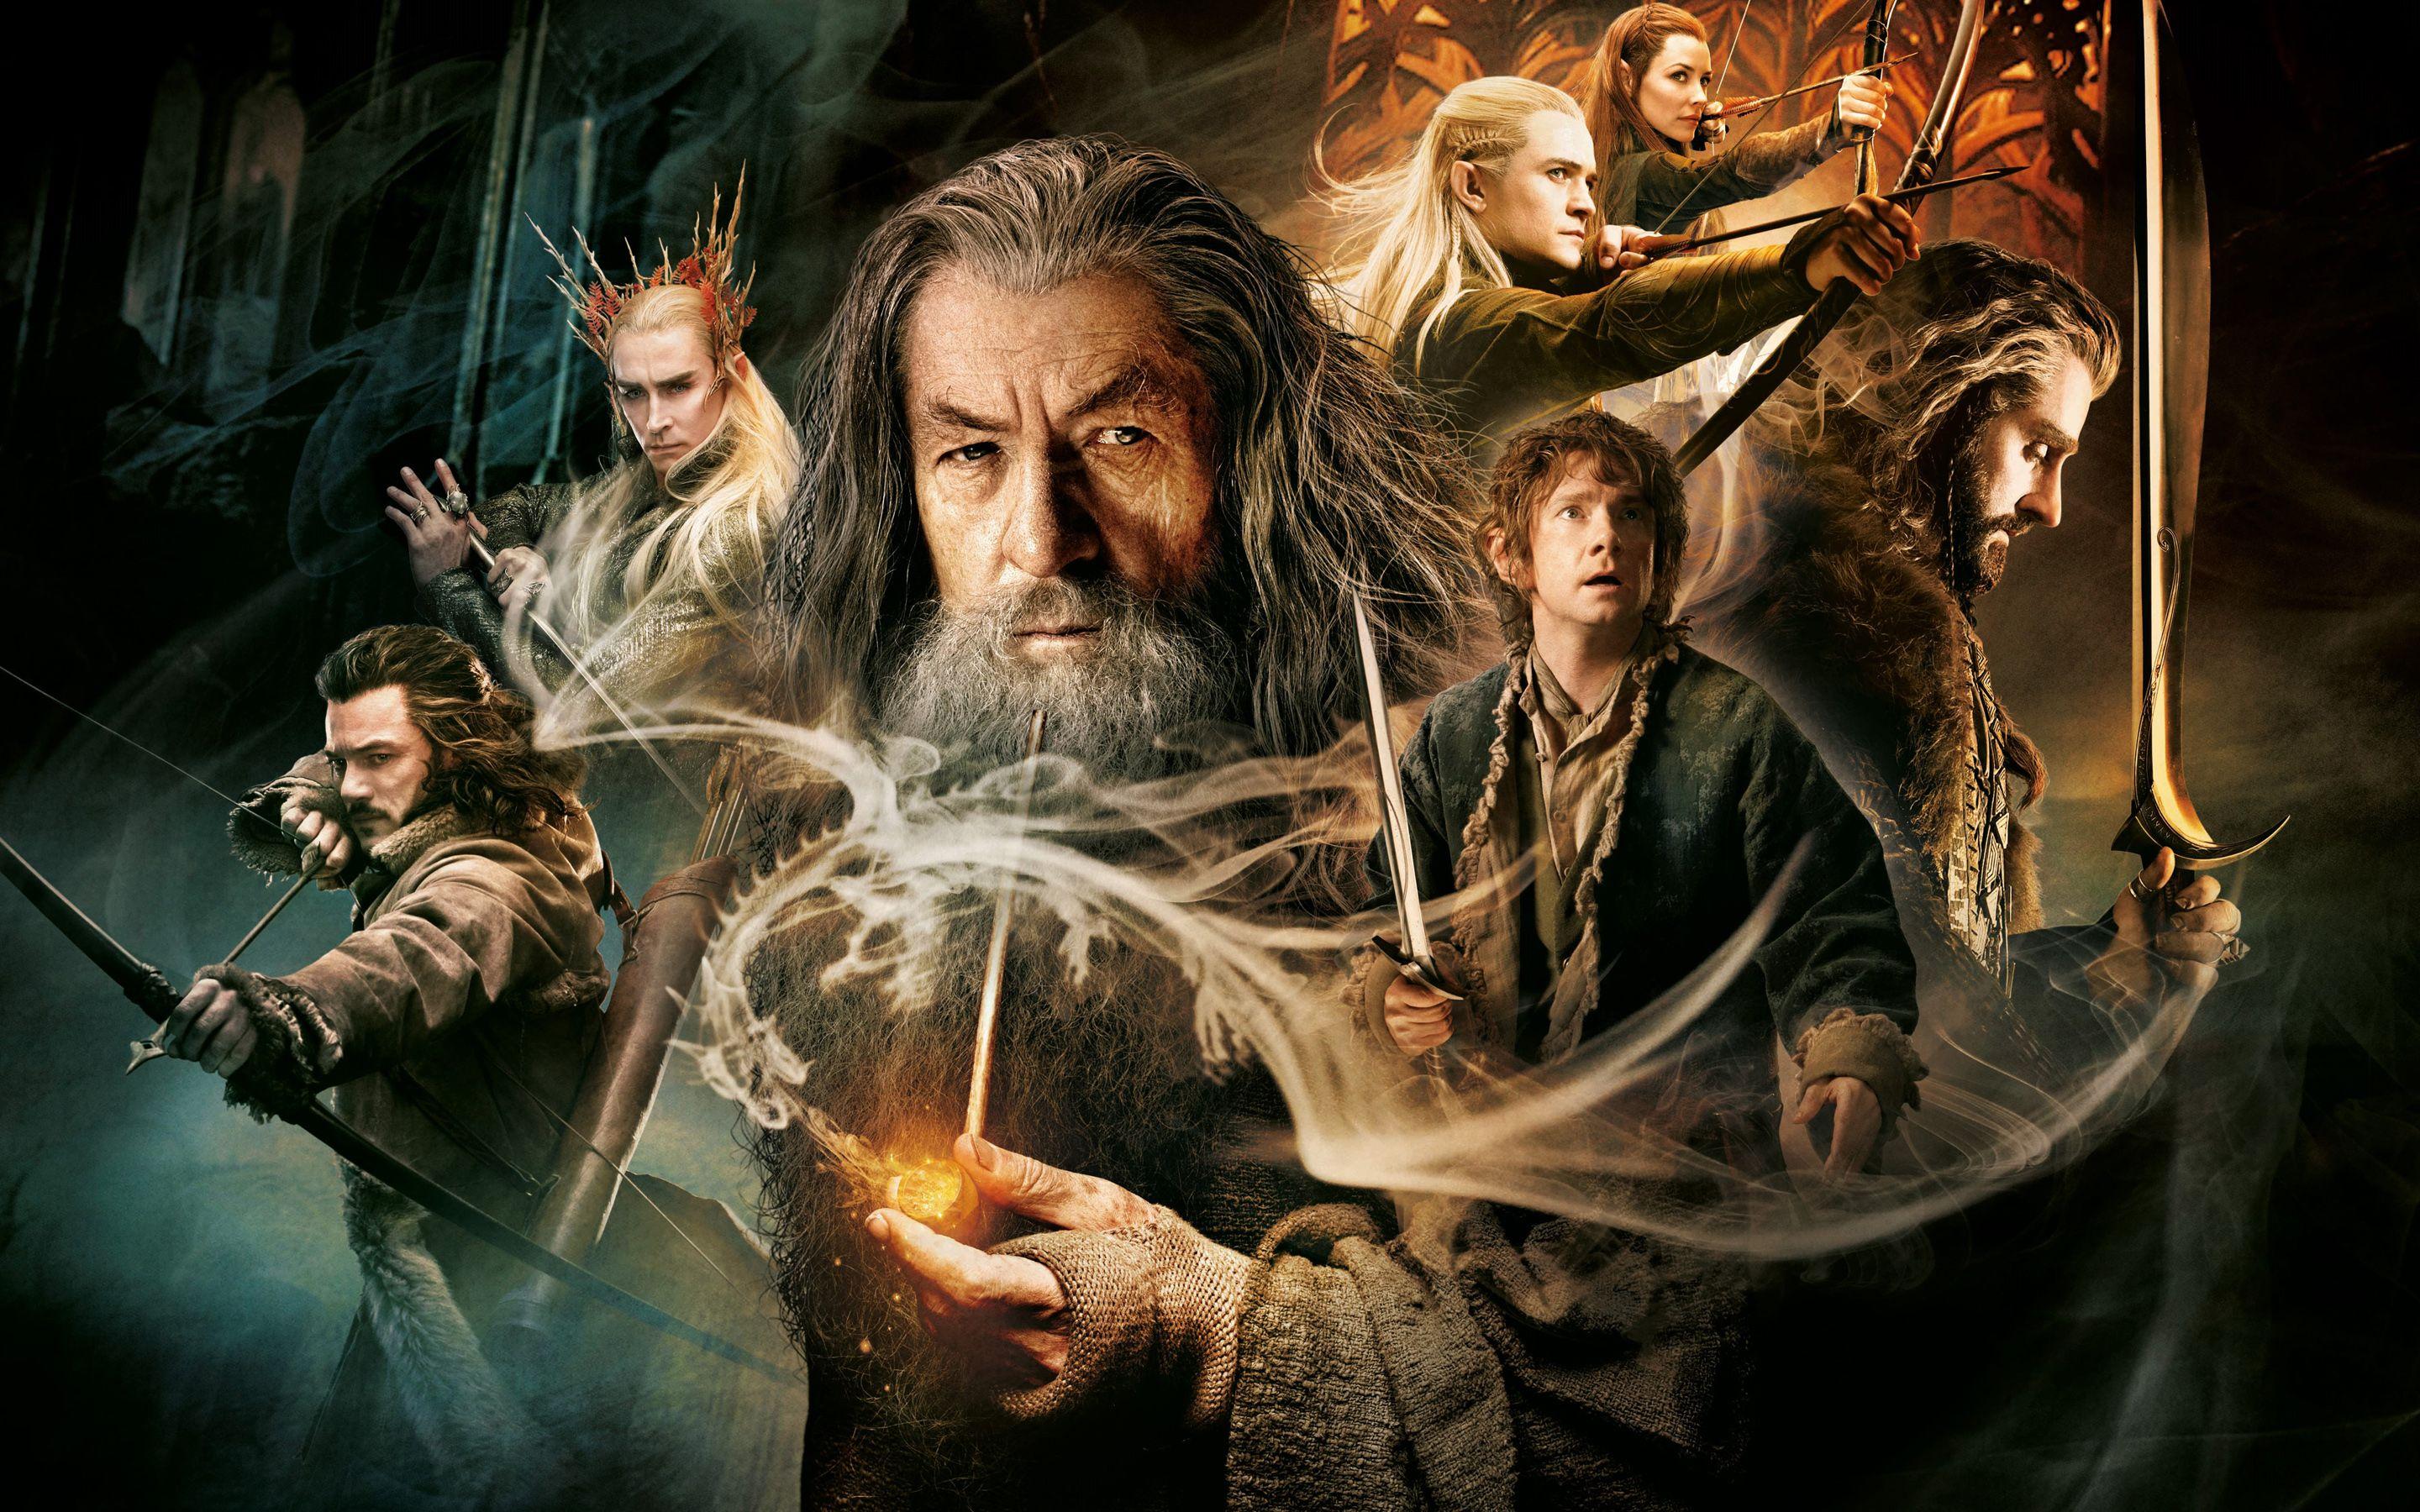 The Hobbit Wallpaper, 36 PC The Hobbit Image in Superb Collection